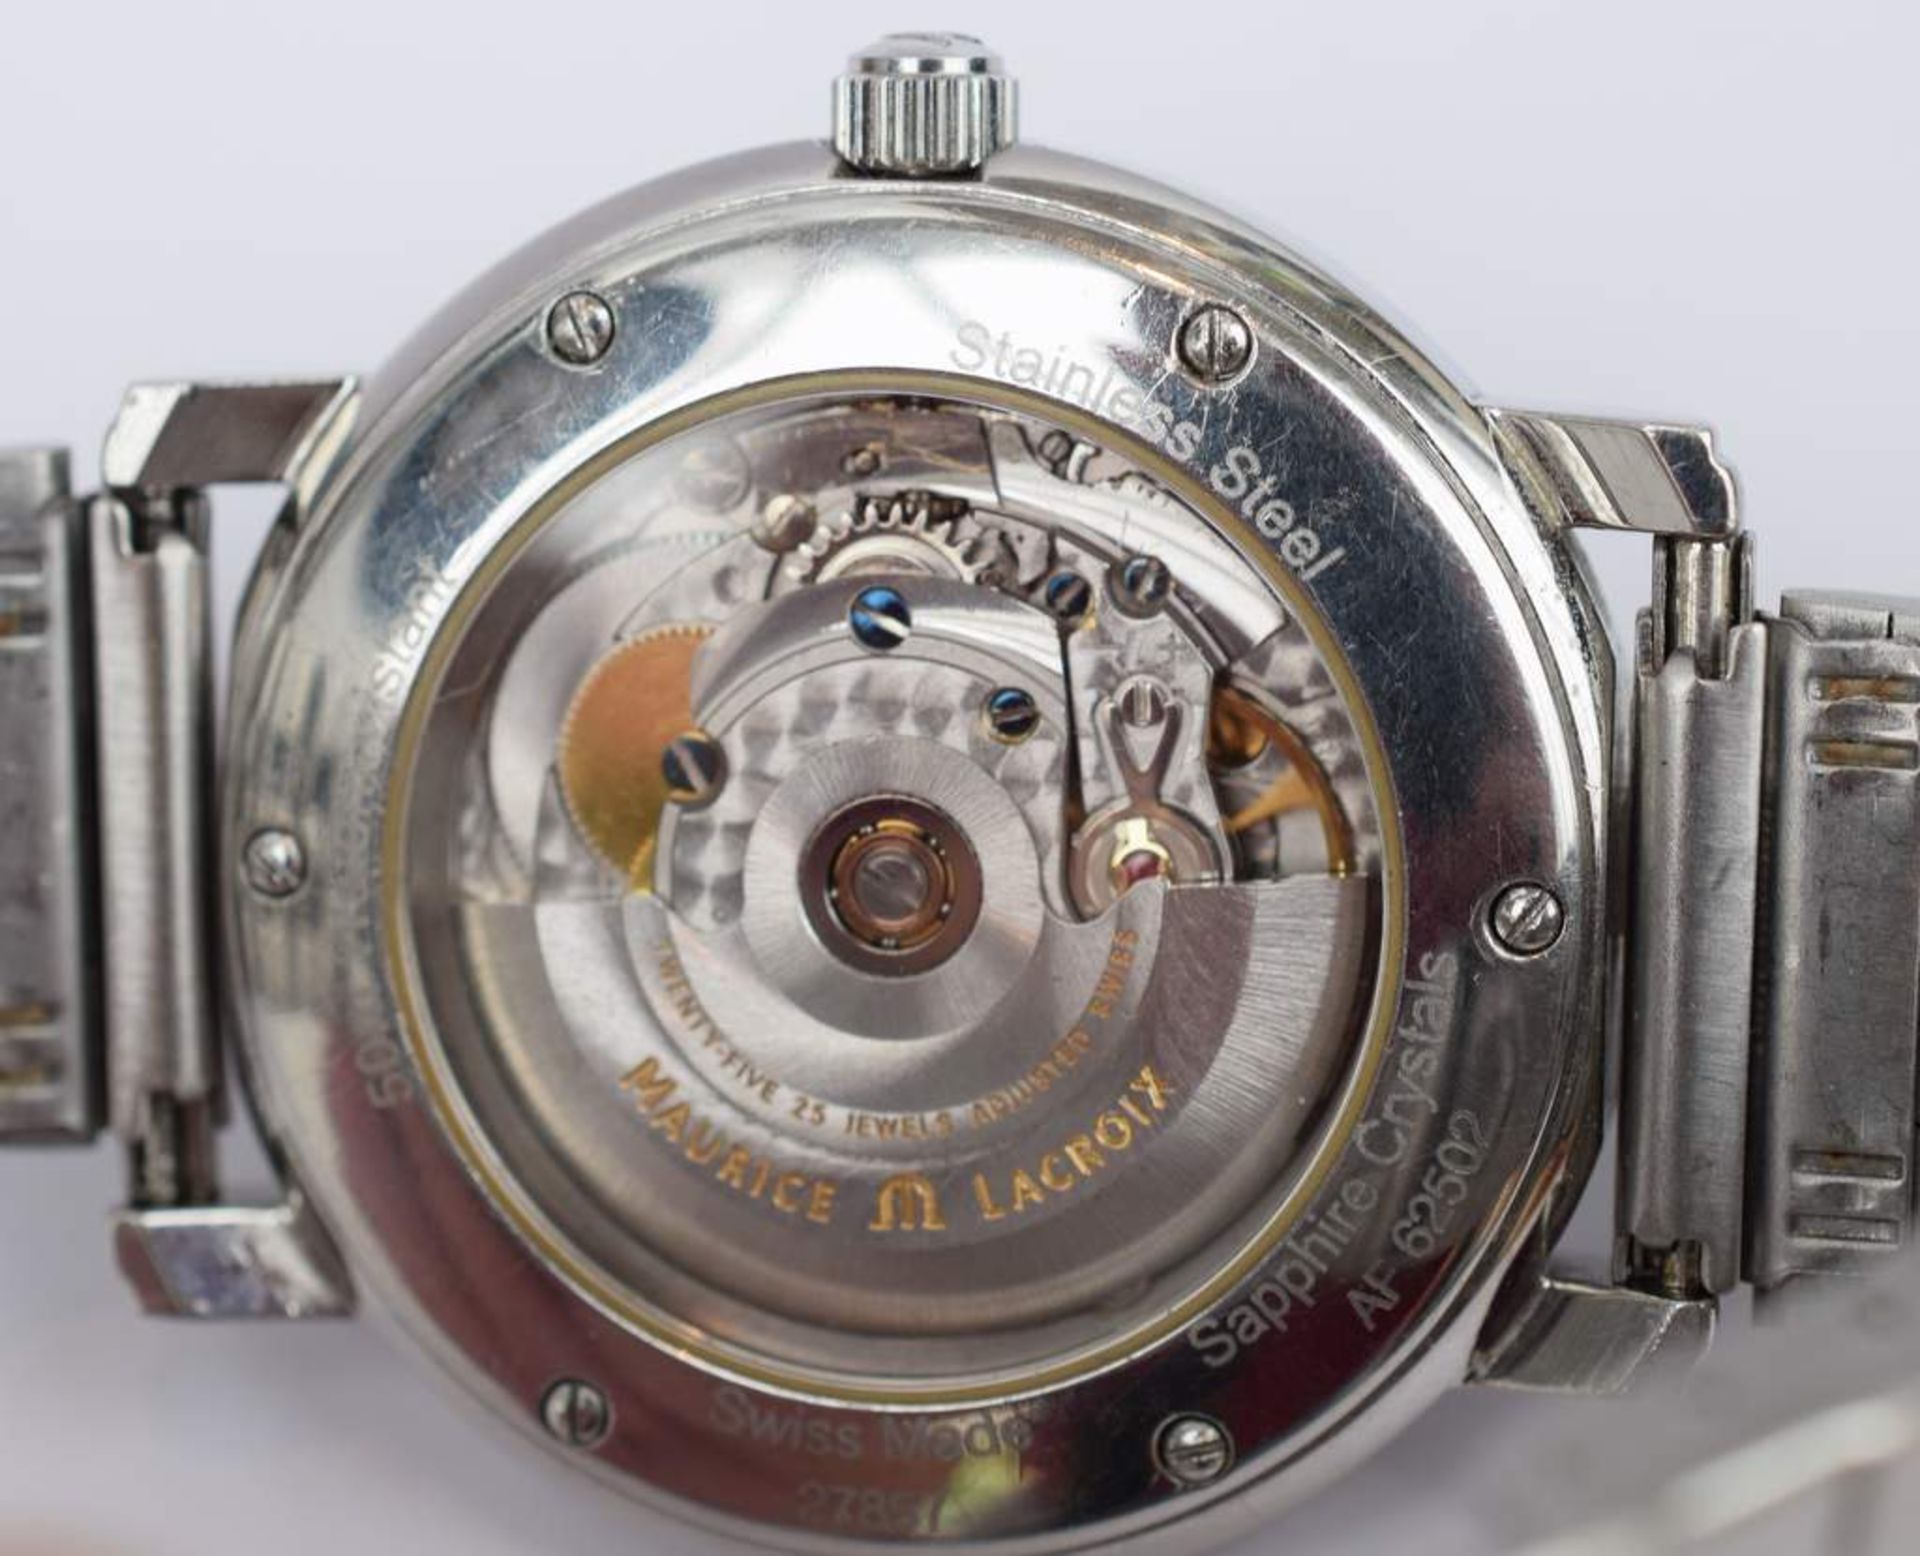 Maurice Lacroix Masterpiece Chronograph - Image 4 of 4